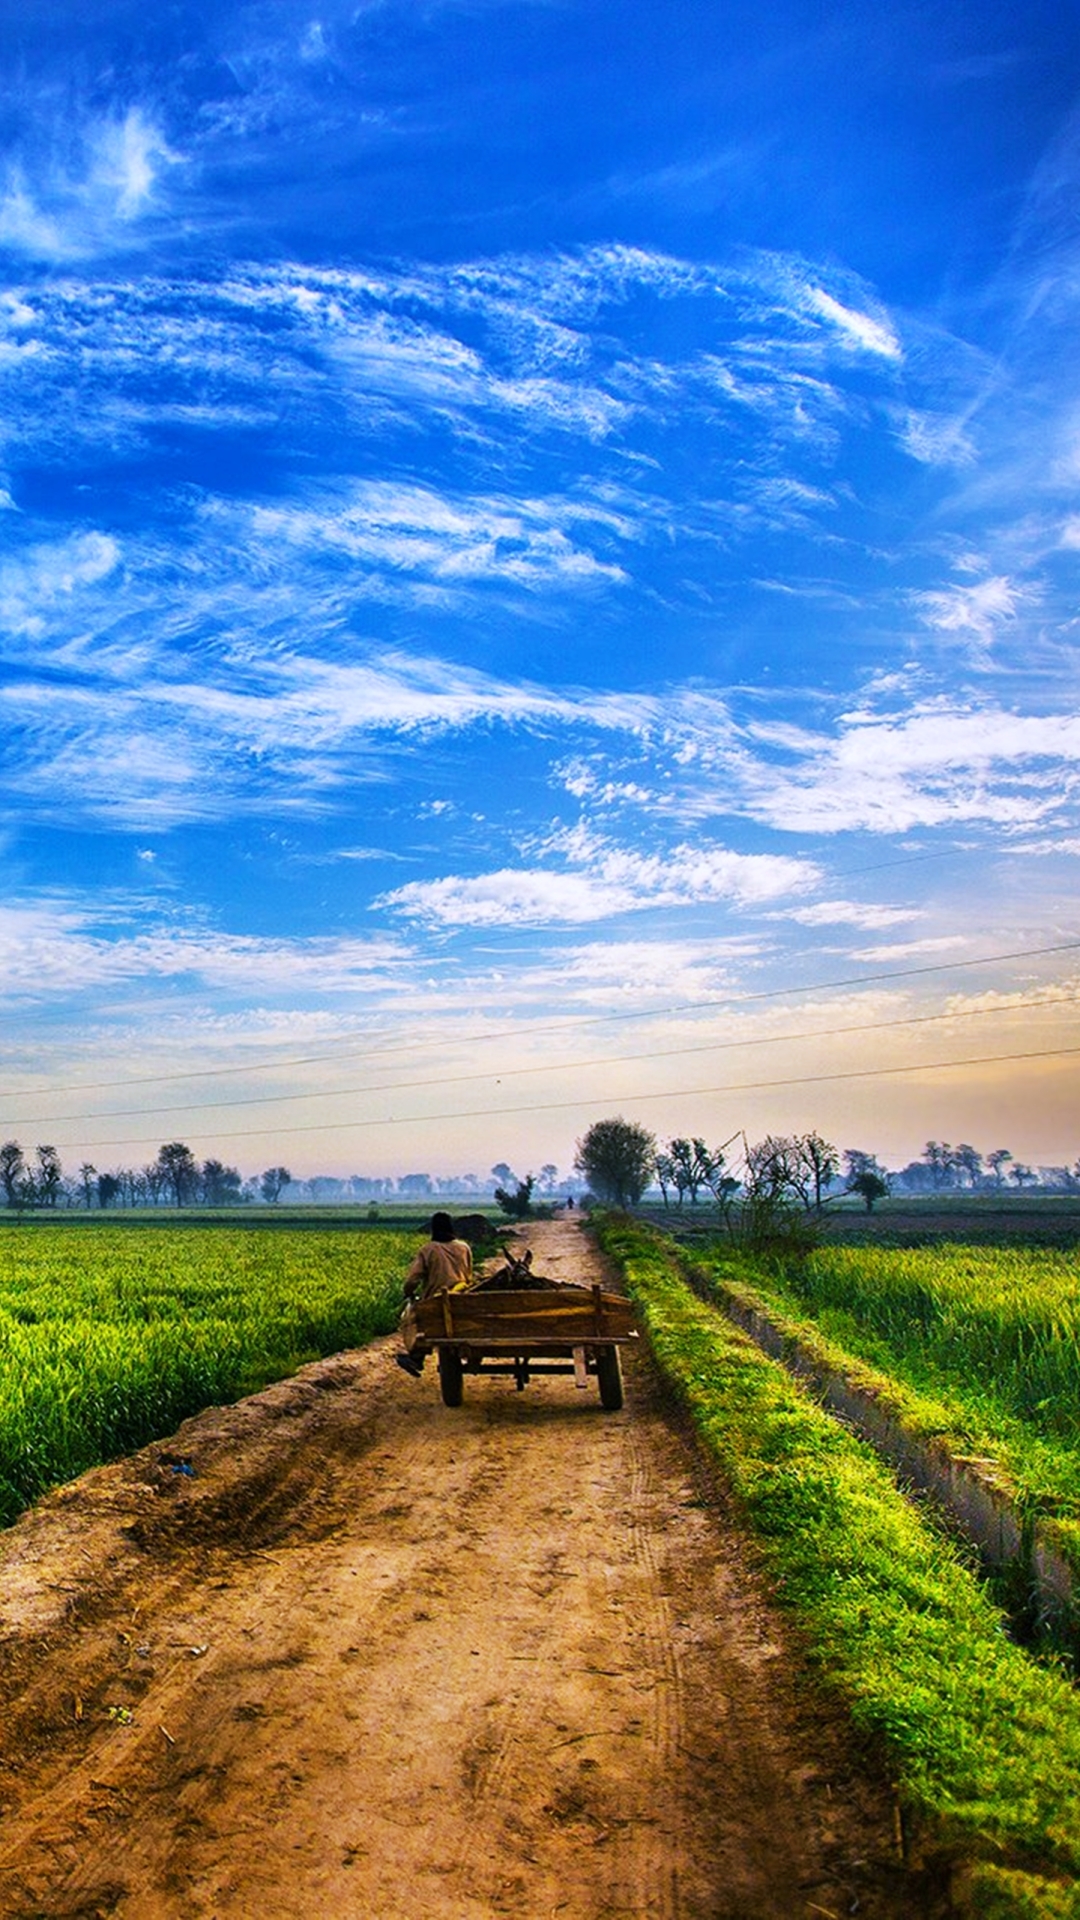 pakistan, countryside, photography, landscape, nature, field, sky High Definition image